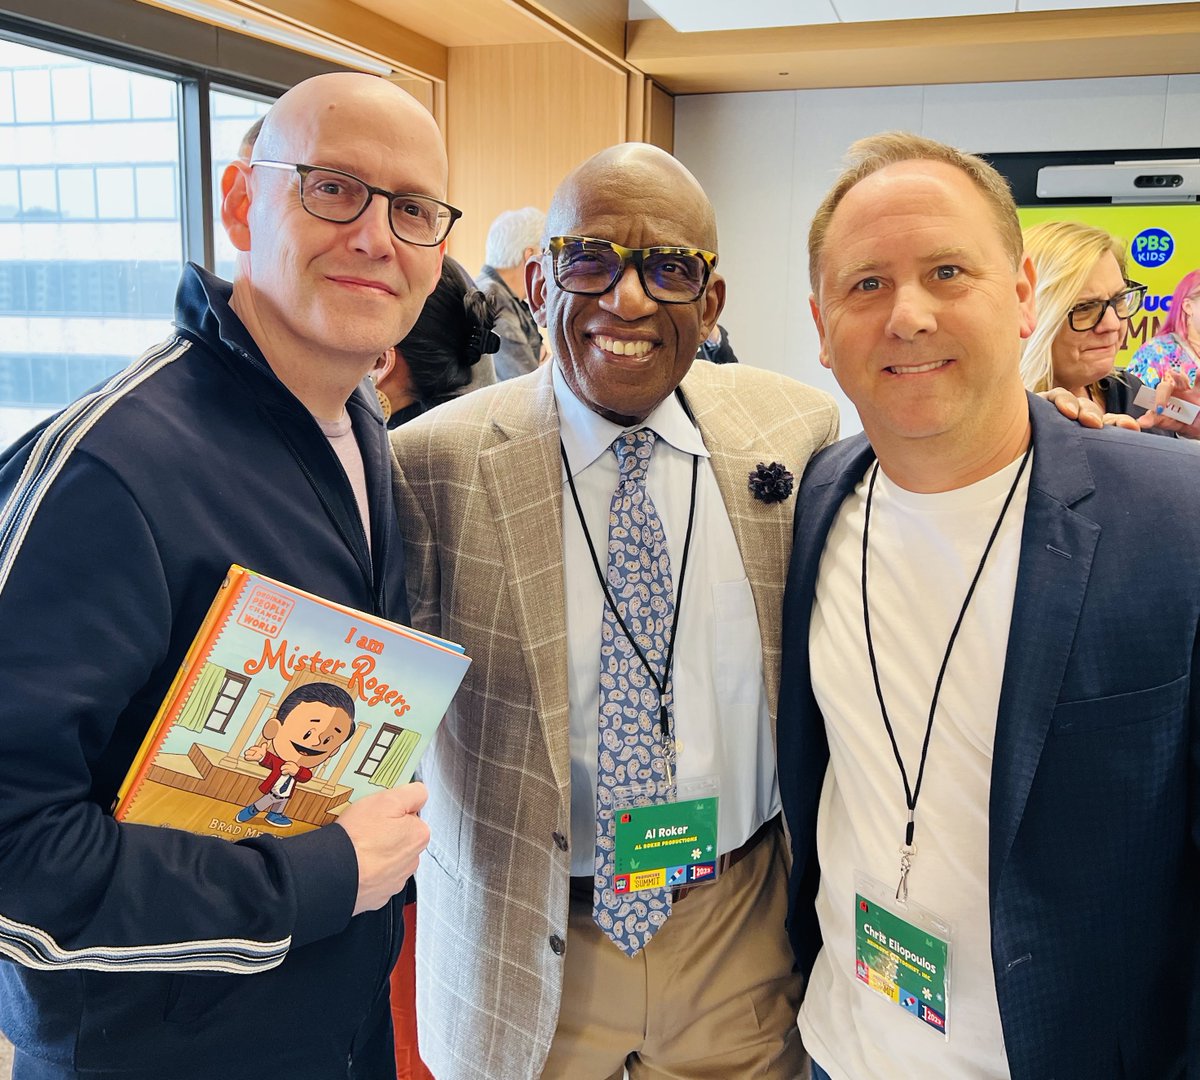 Thanks for your constant kindness all these years, @AlRoker. Truly one of the most generous around. @ChrisEliopoulos, you’re nice too.

#optcw #alroker #kindness #misterrogers